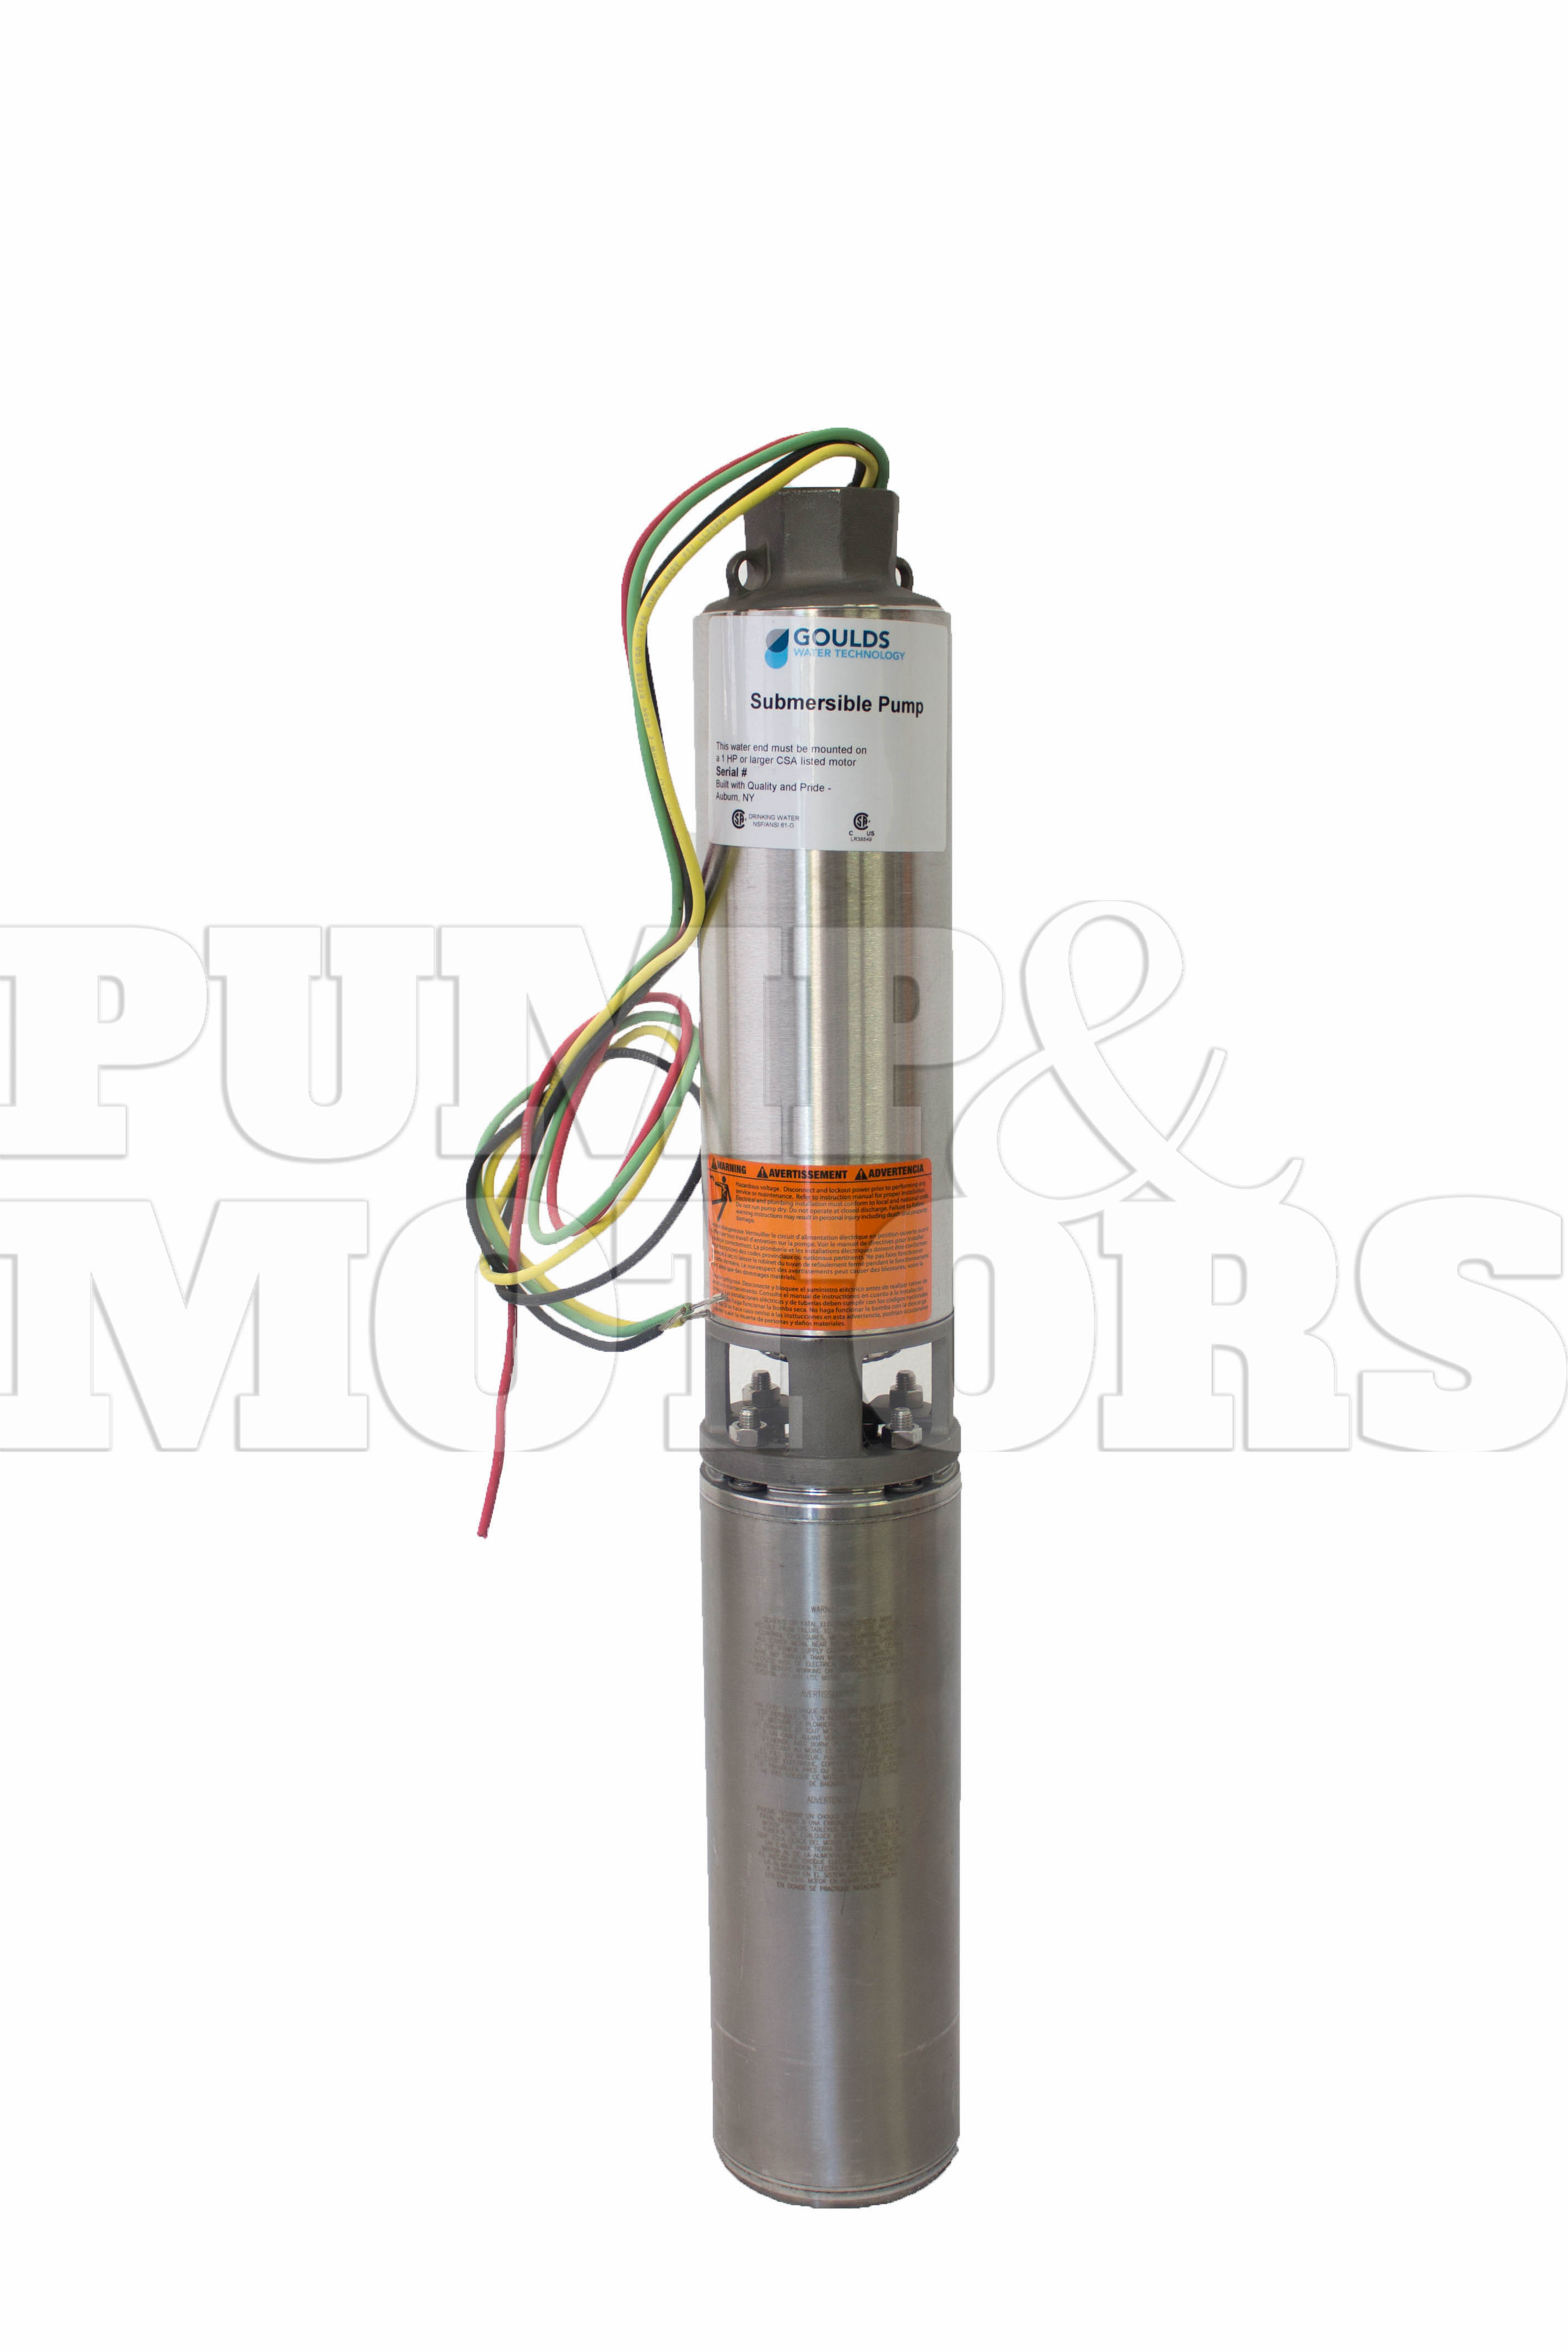 Goulds 40GS30412CL 3 HP 230V Submersible Water Well Pump 40GPM